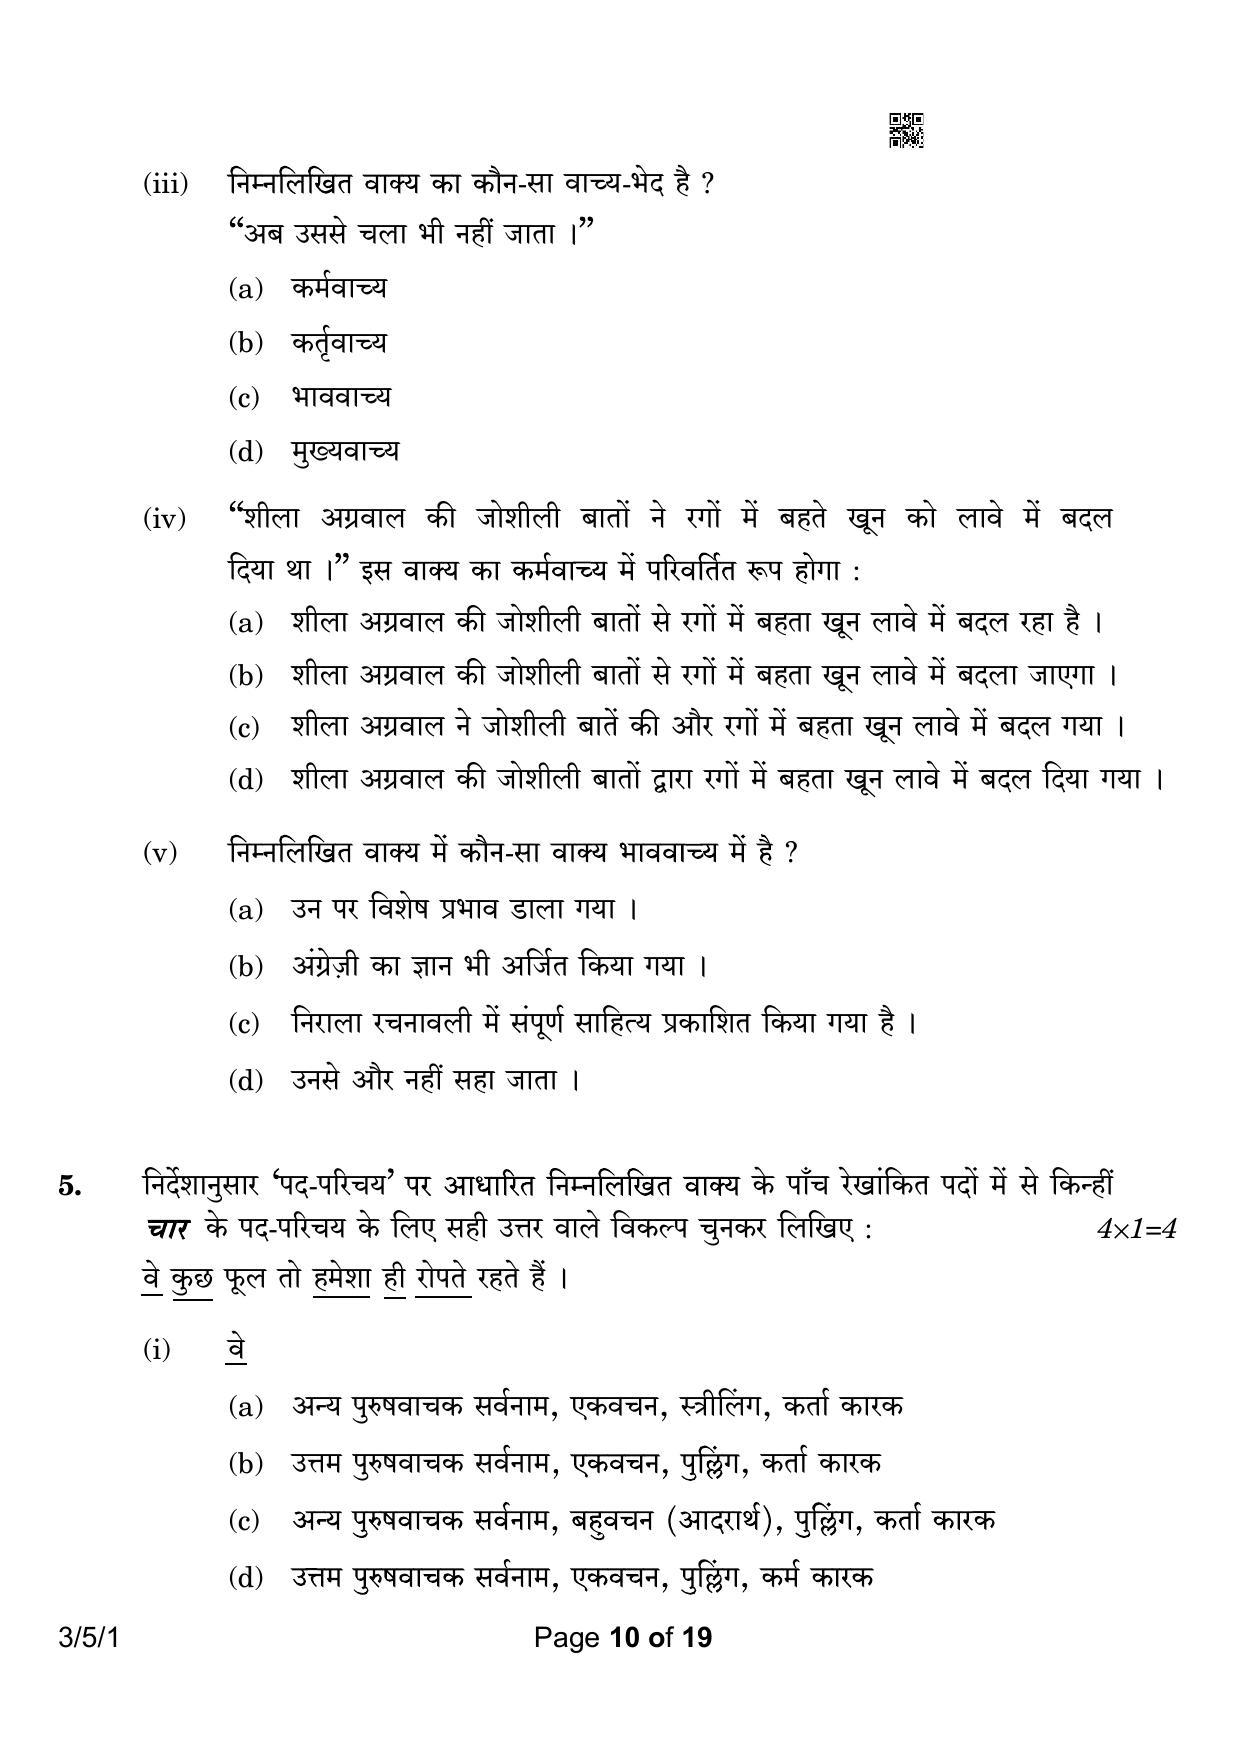 CBSE Class 10 3-5-1 Hindi A 2023 Question Paper - Page 10